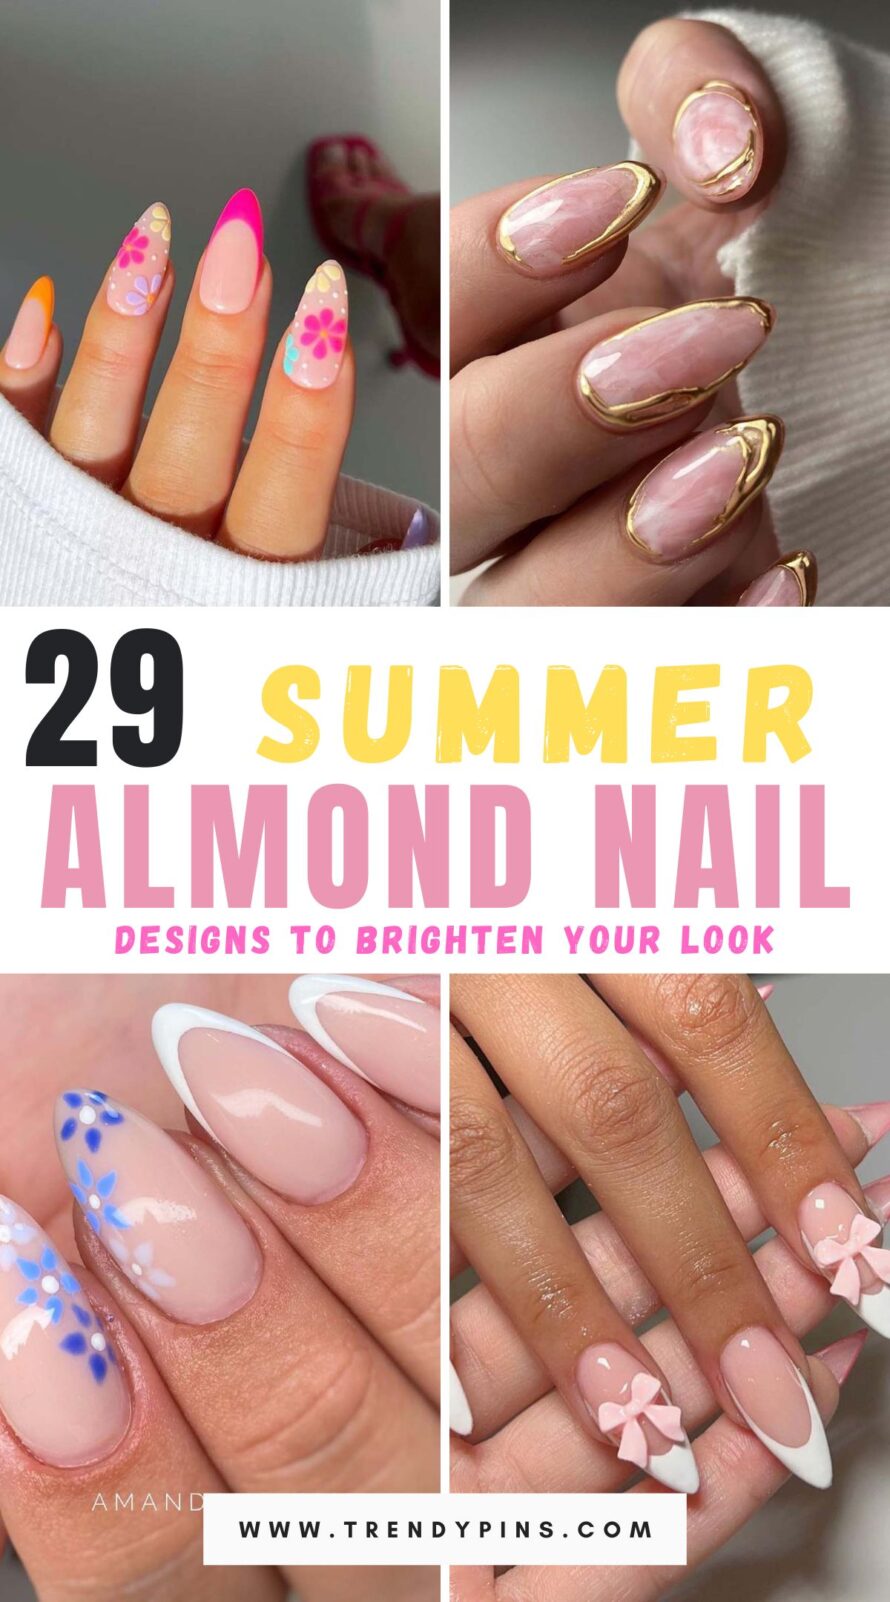 Discover 29 stunning summer almond nail designs to add a touch of brightness to your look. From vibrant colors and floral patterns to glitter accents and ombre effects, these designs are perfect for embracing the sunny season in style. Whether you prefer bold and eye-catching or subtle and sophisticated, these nail designs offer endless inspiration to elevate your summer manicure game.